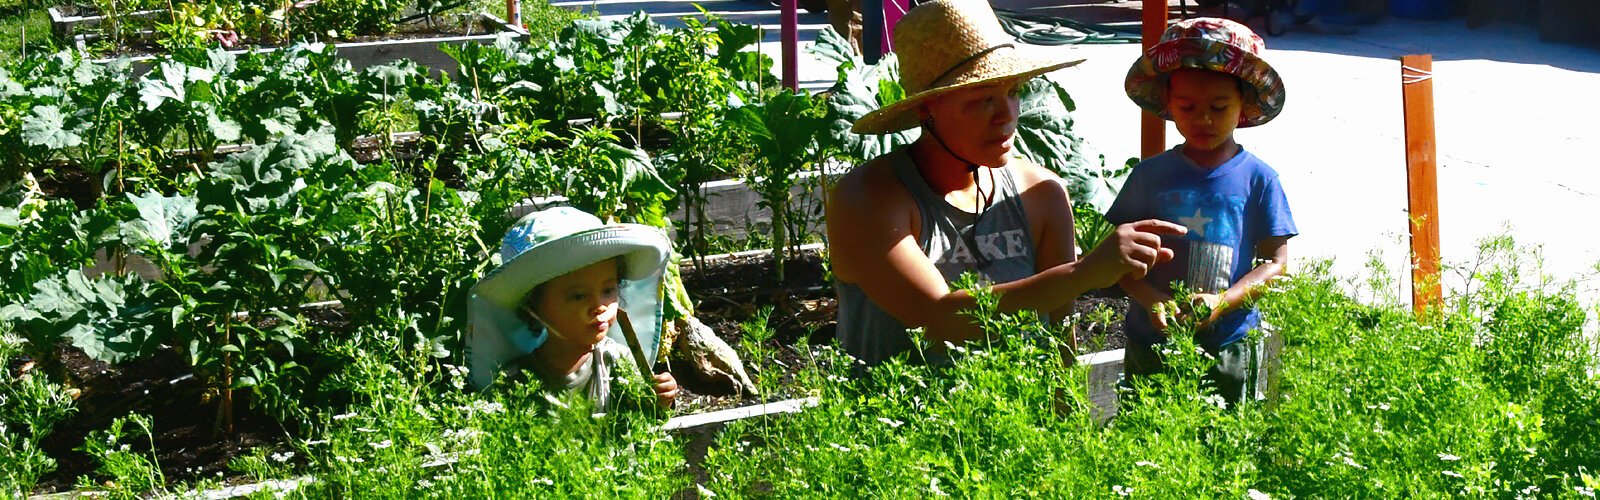 Dawn Elliot introduces her children to the joys of gardening and picking up fresh vegetables at Harvest Hope.